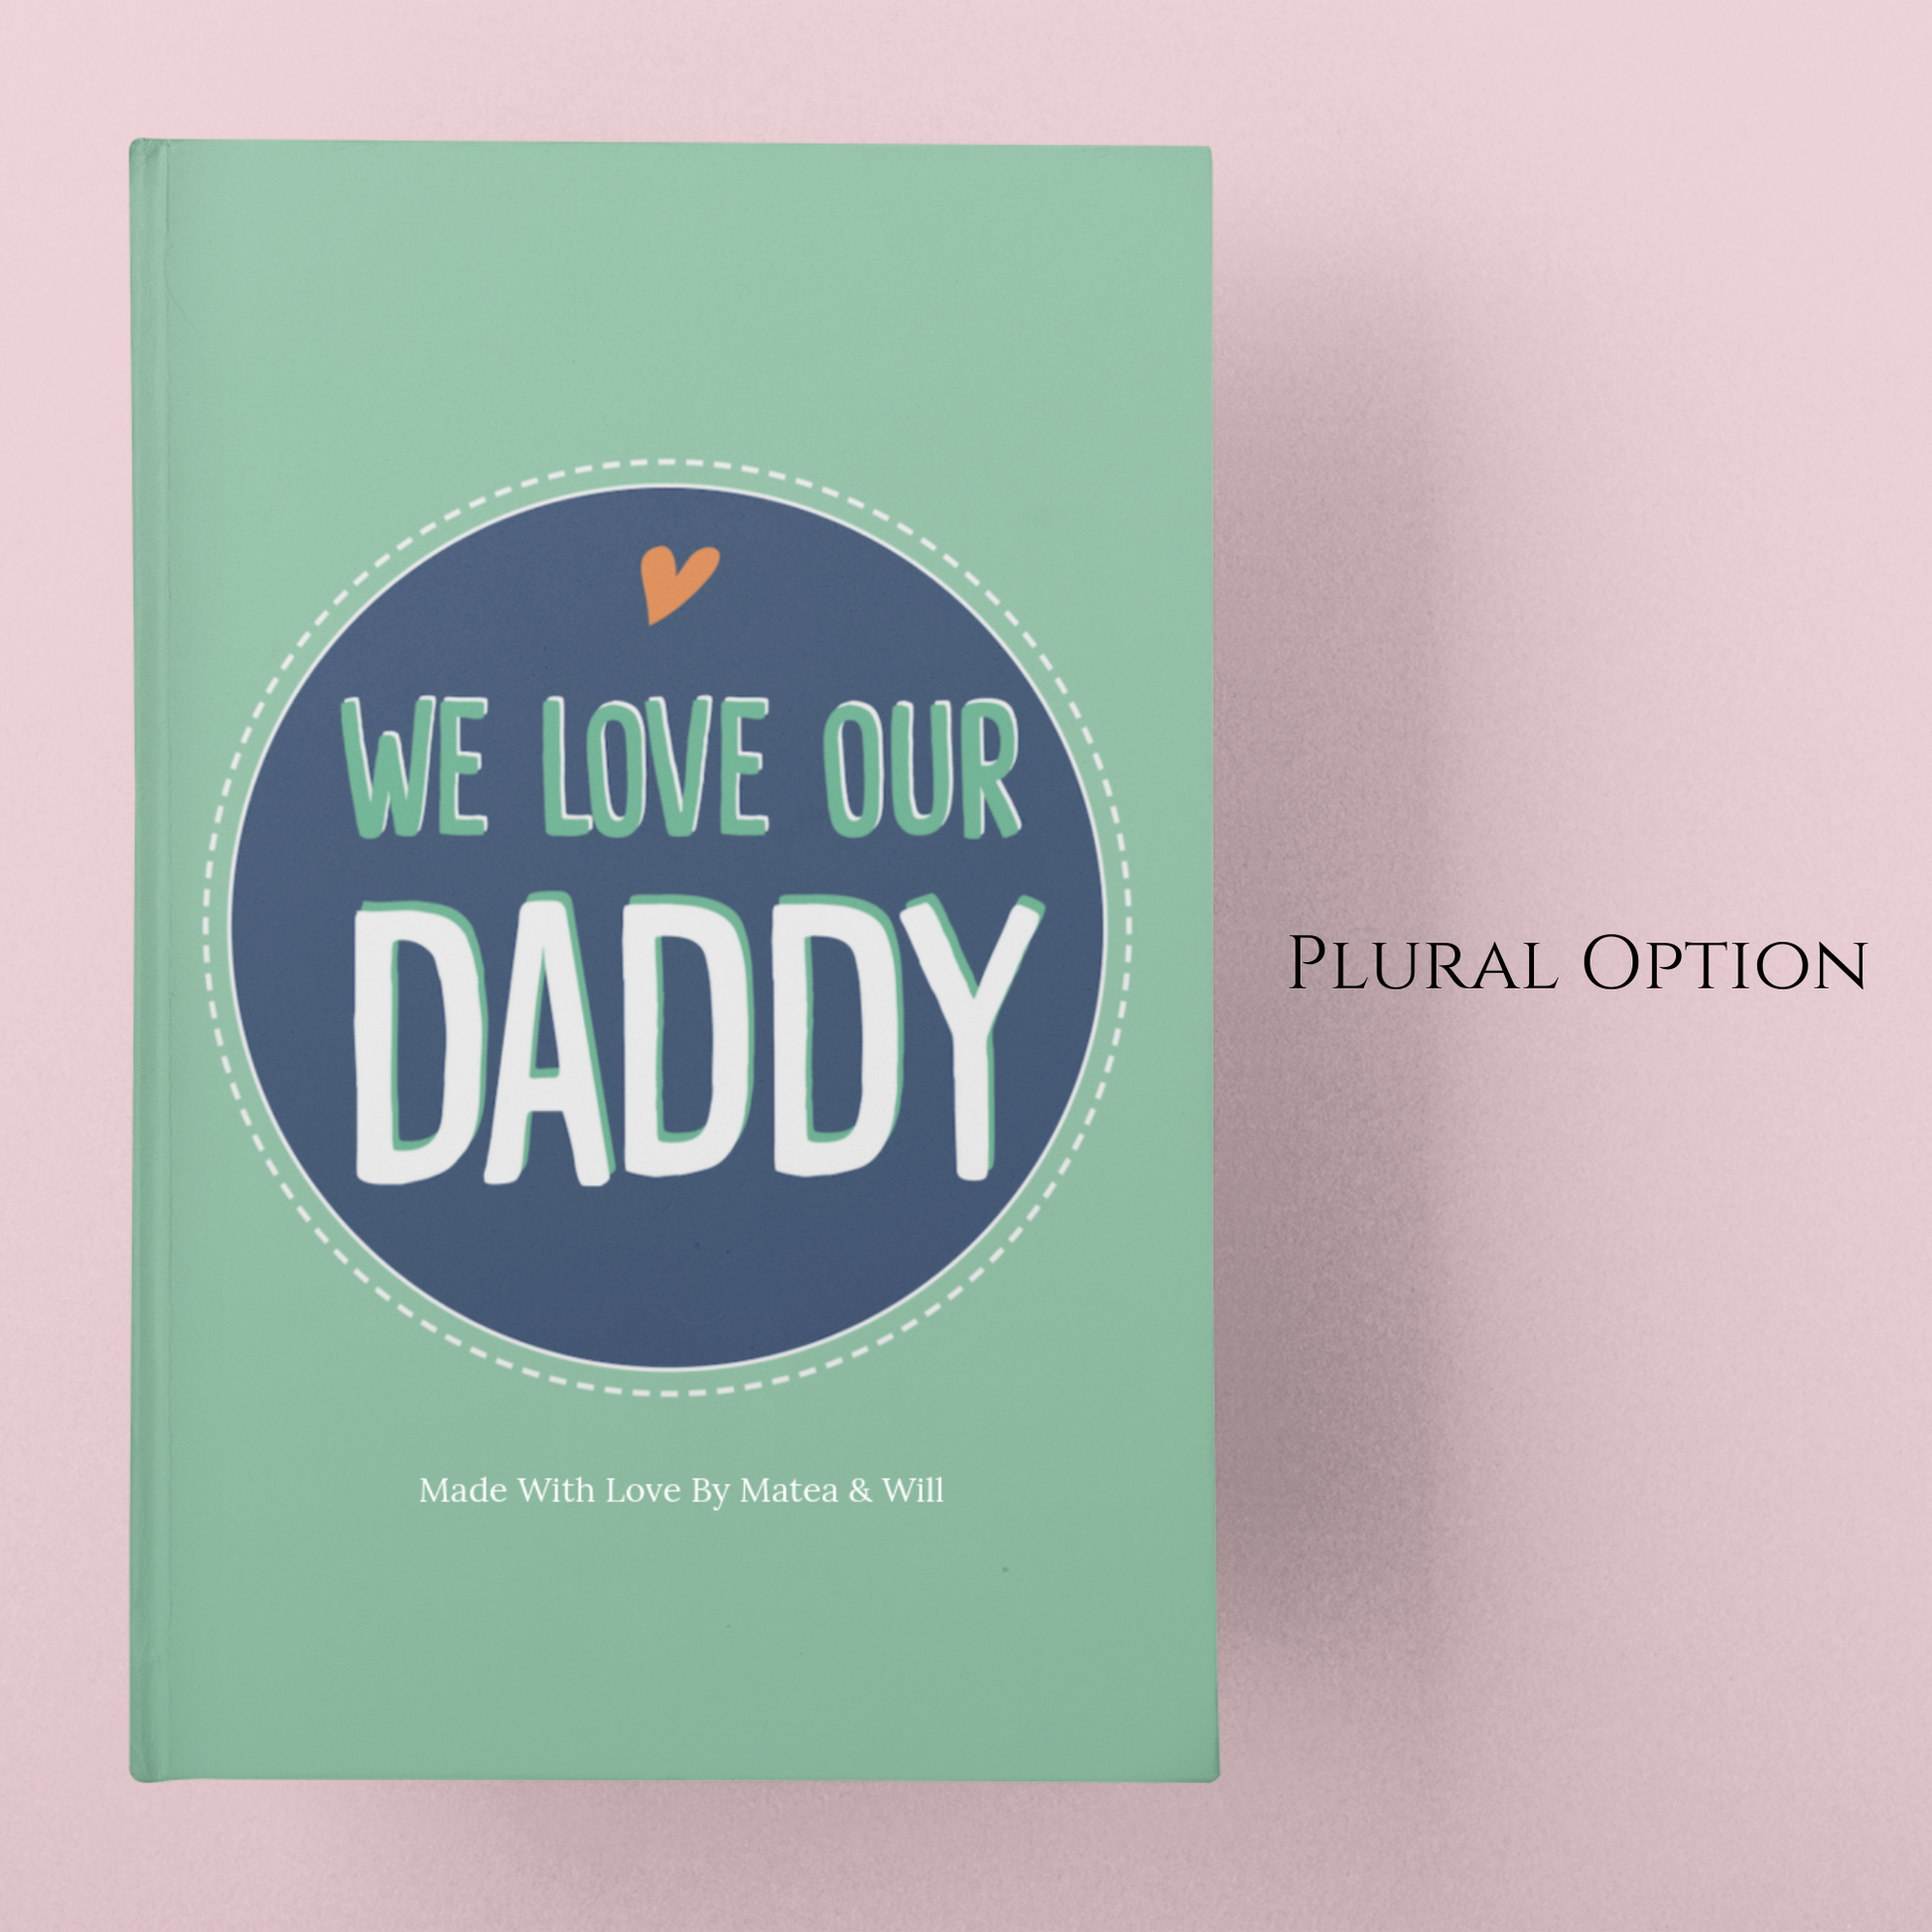 Personalized gift for dad. Gift for father from kids. Personalized Book. Fill in the blank book. Luhvee Books.